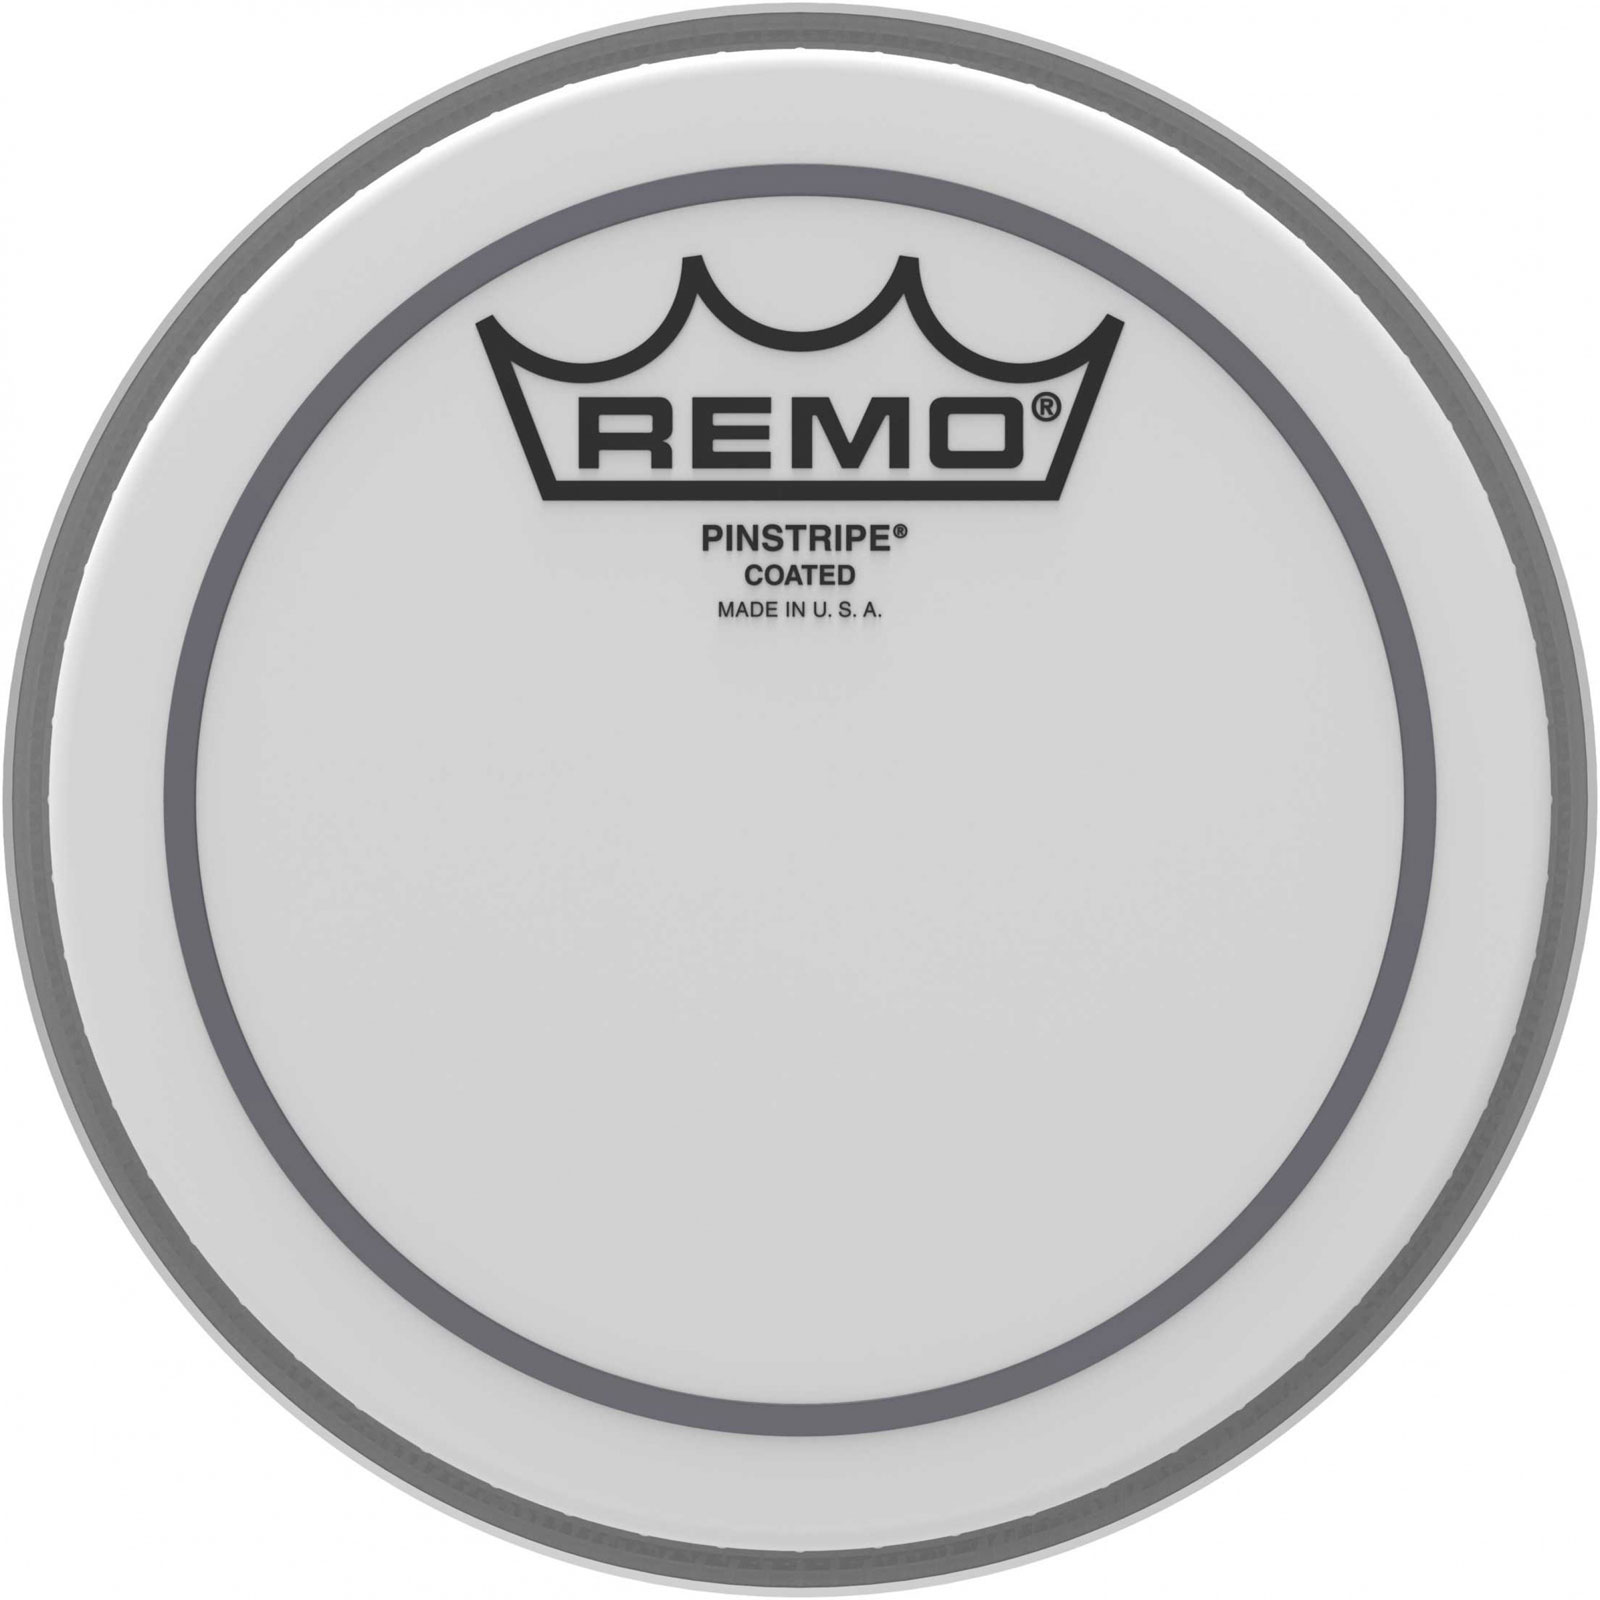 REMO PS-0106-00 - PINSTRIPE COATED 6